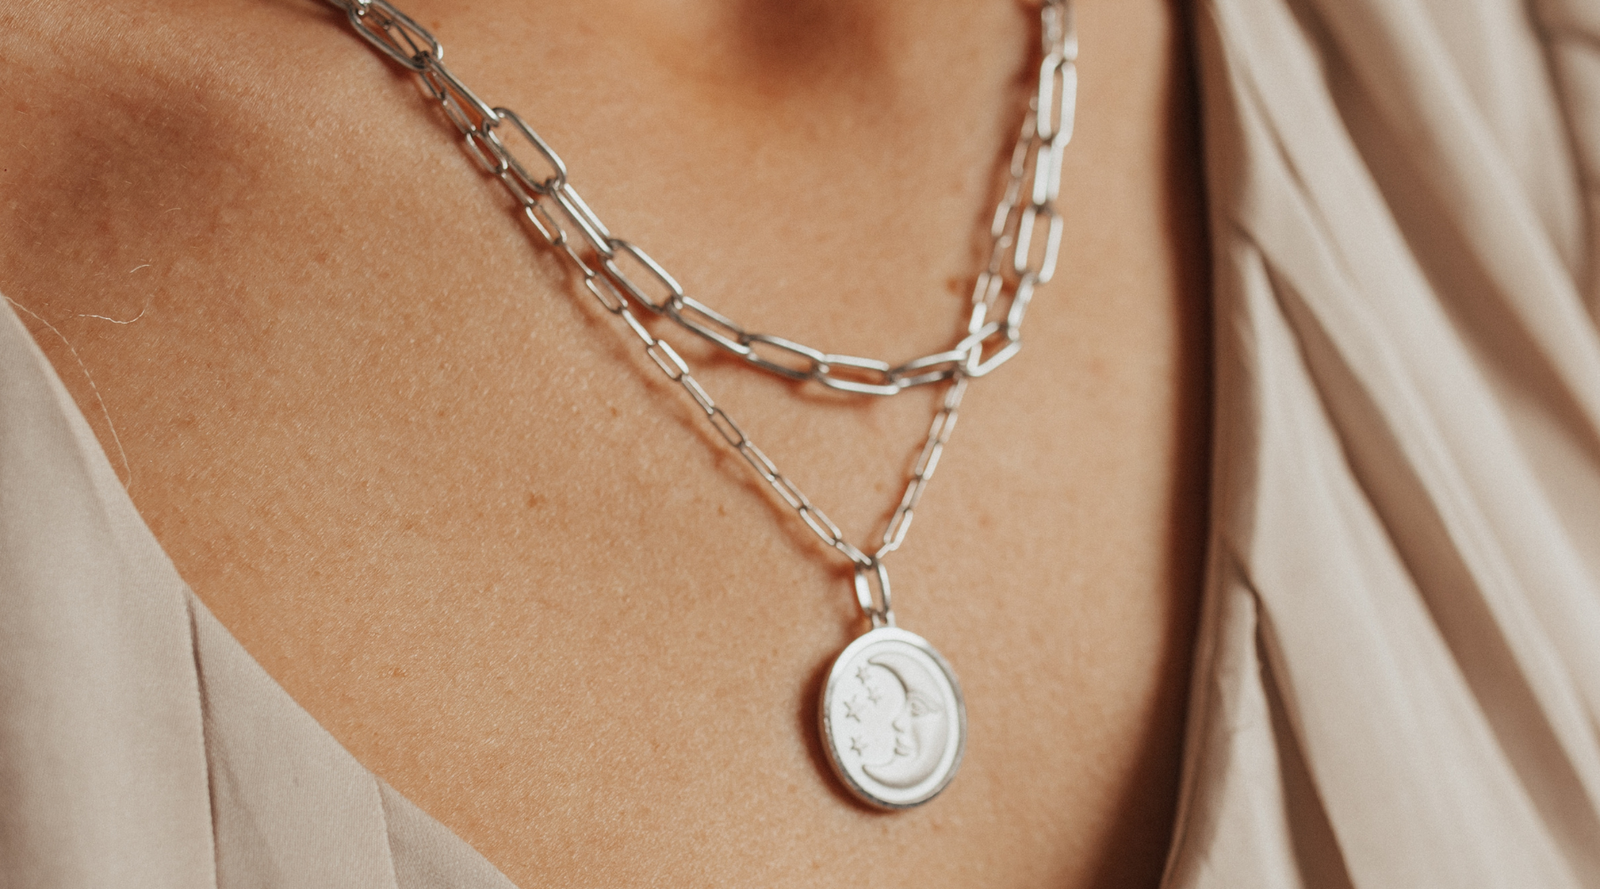 Necklet review: Does it keep your necklaces from tangling? - Reviewed